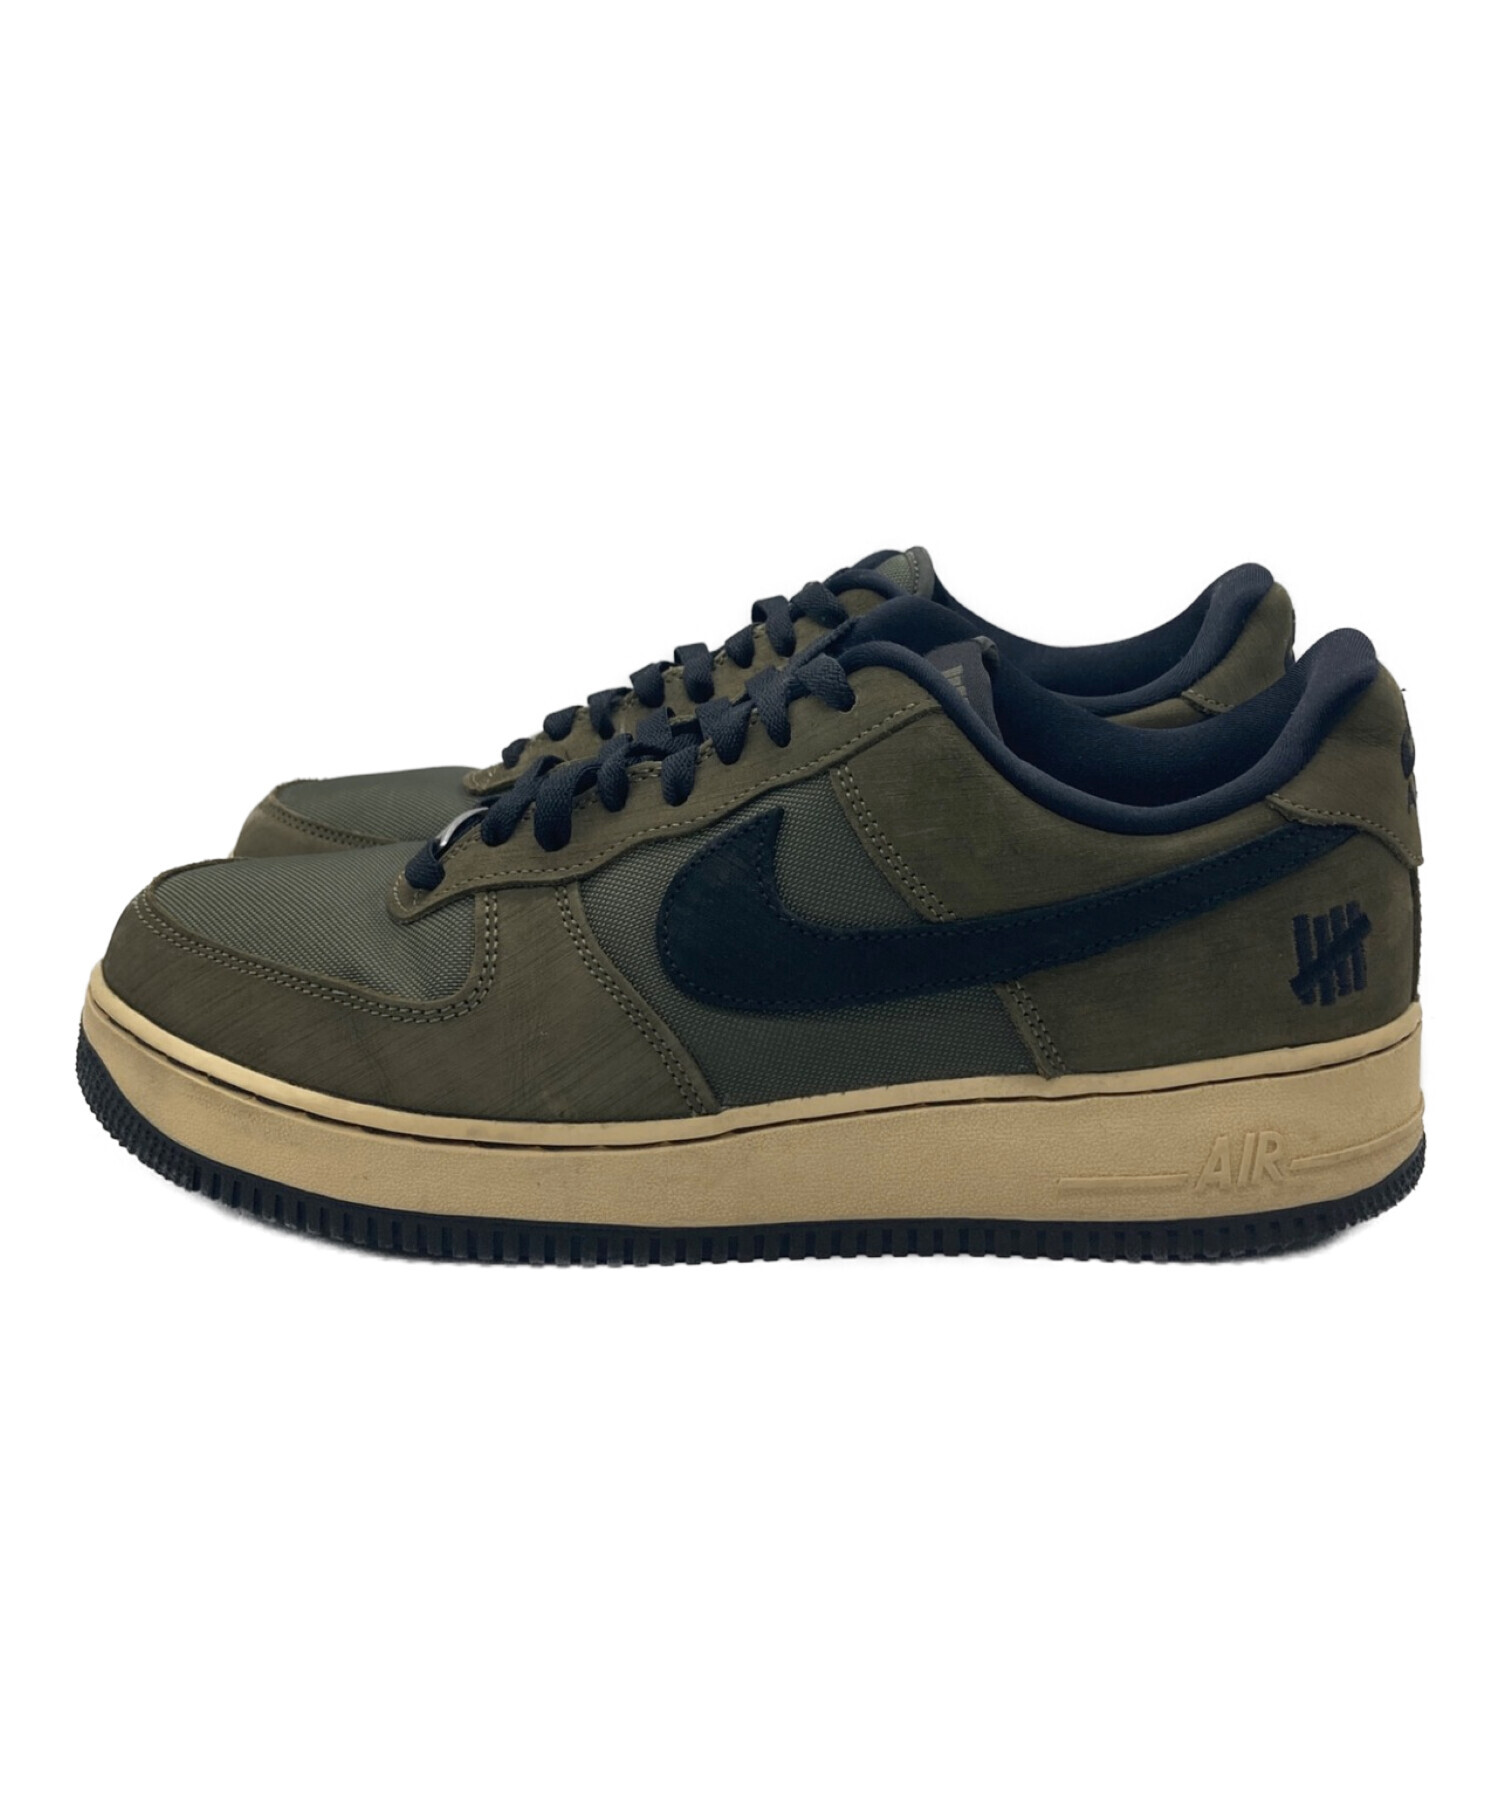 NIKE (ナイキ) UNDEFEATED (アンディーフィーテッド) AIR FORCE 1 LOW SP オリーブ サイズ:28cm